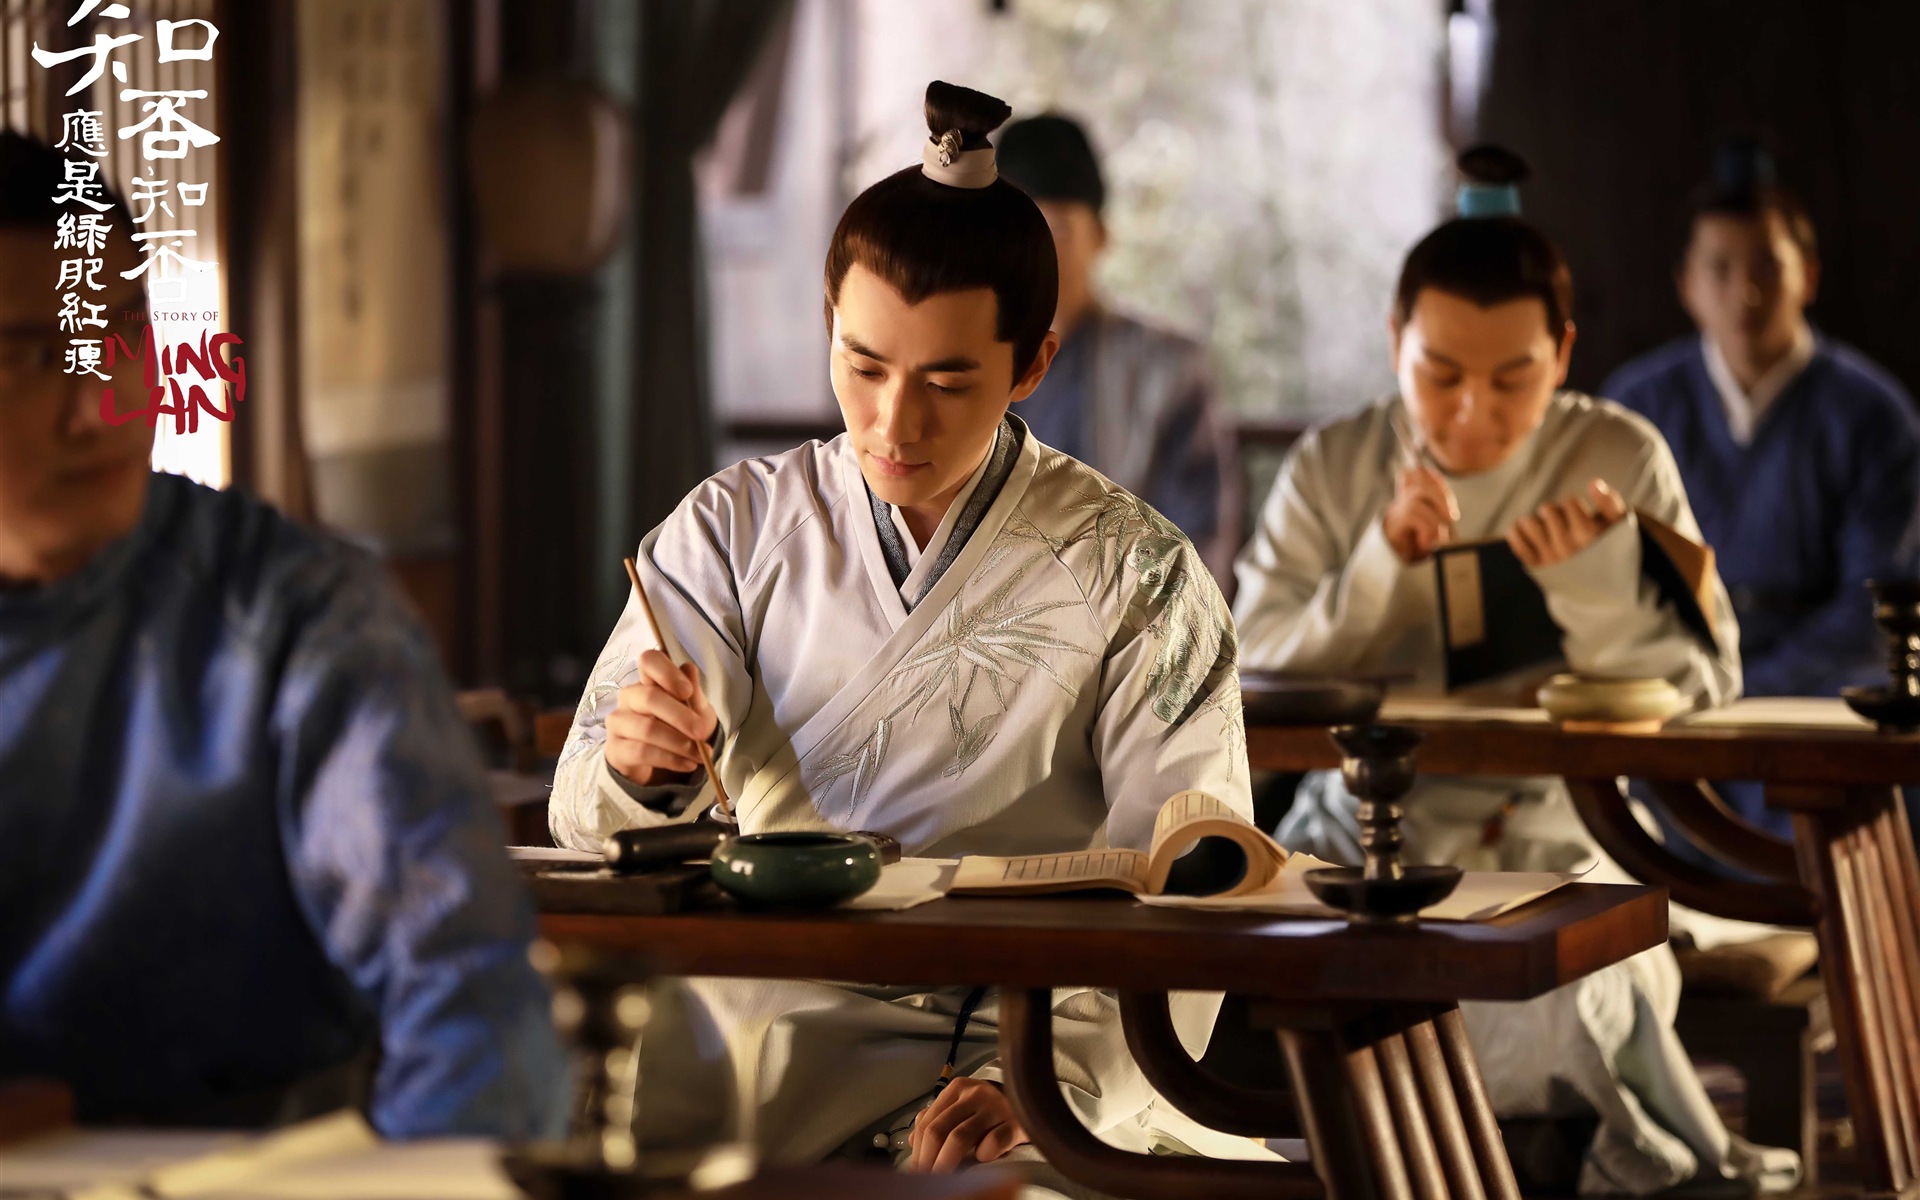 The Story Of MingLan, TV series HD wallpapers #37 - 1920x1200